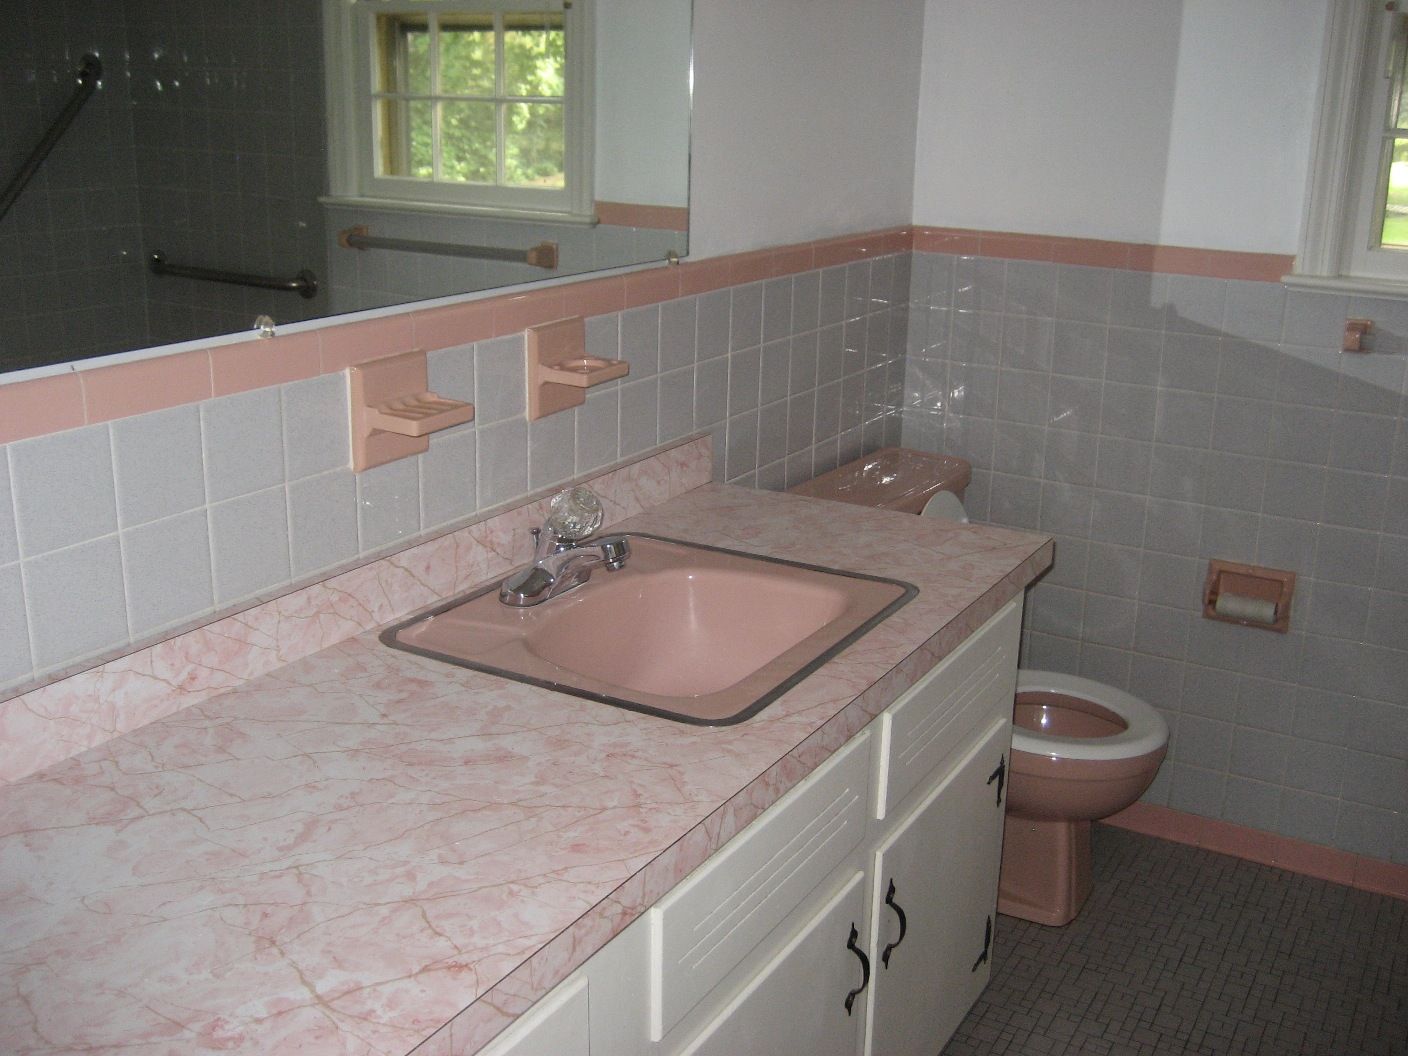 And just down the hallway is the worlds most beautiful bathroom! Its PINK!  And like the kitchen, the formica countertops are in pristine condition. The tile floors and wall are also in beautiful shape. What could be better than a cast-iron, 1960s Kohler bathtub? Nothing! Unless its a PINK cast-iron, 1960s Kohler bathtub!